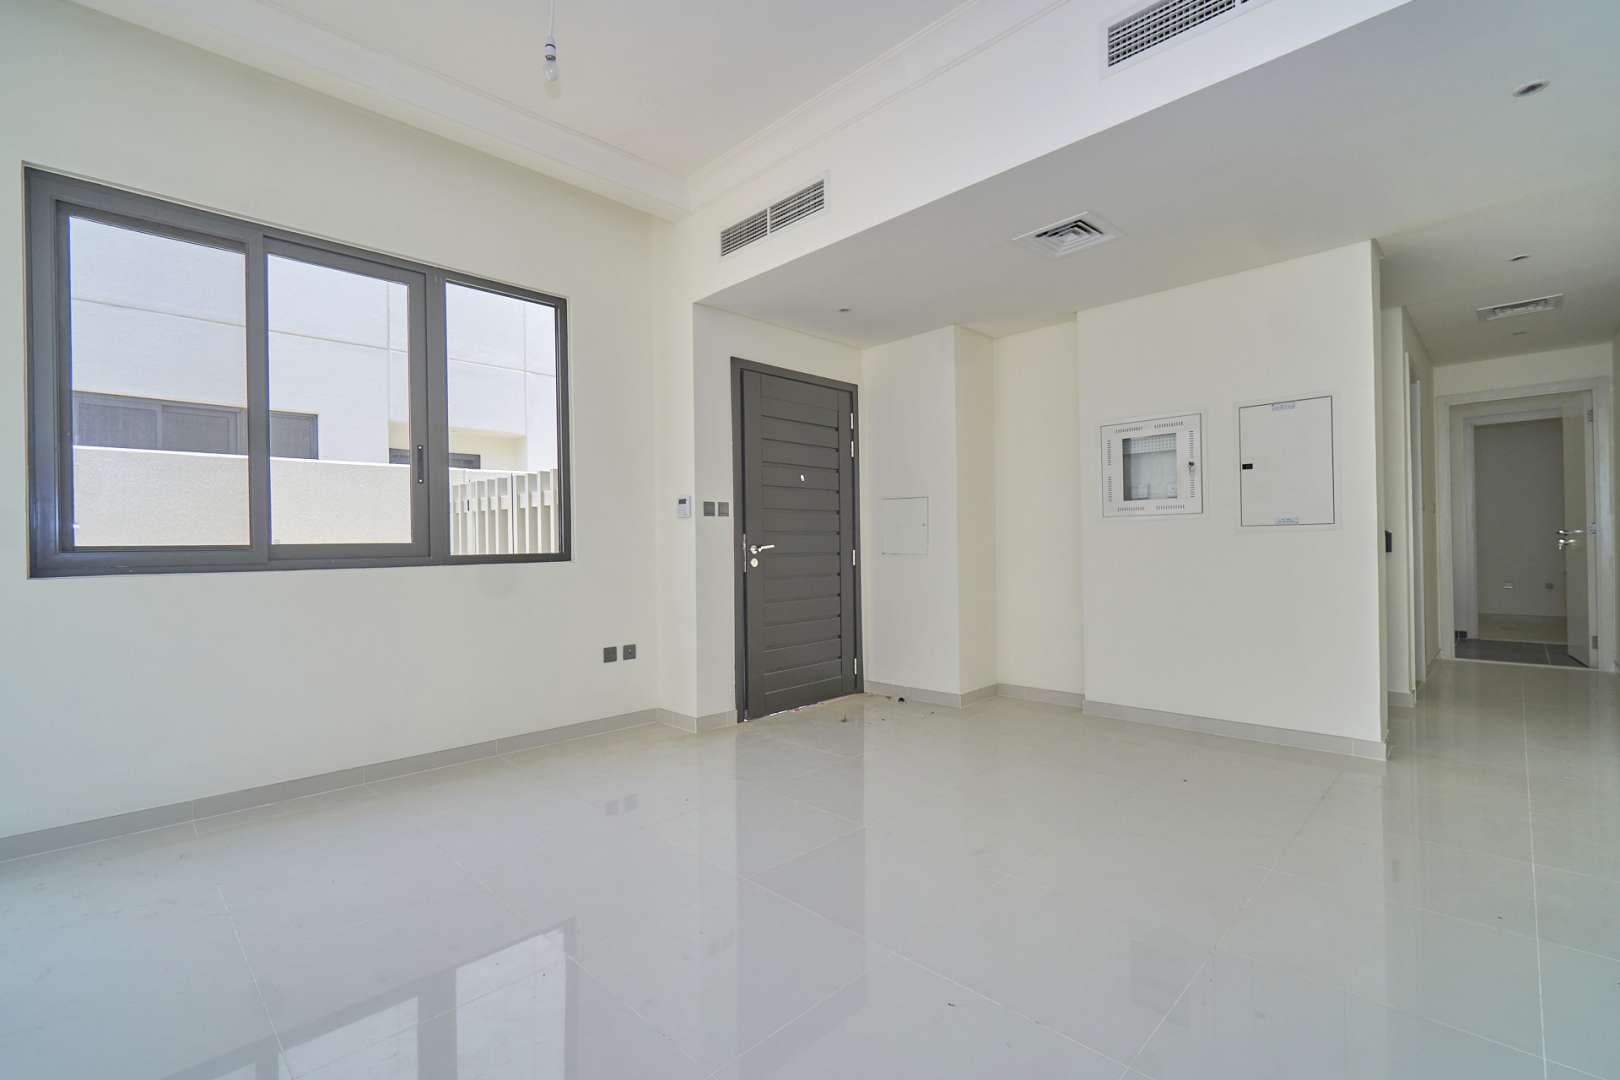 3 Bedroom Townhouse For Rent Aster Lp07680 231d2cc4305ab400.jpg